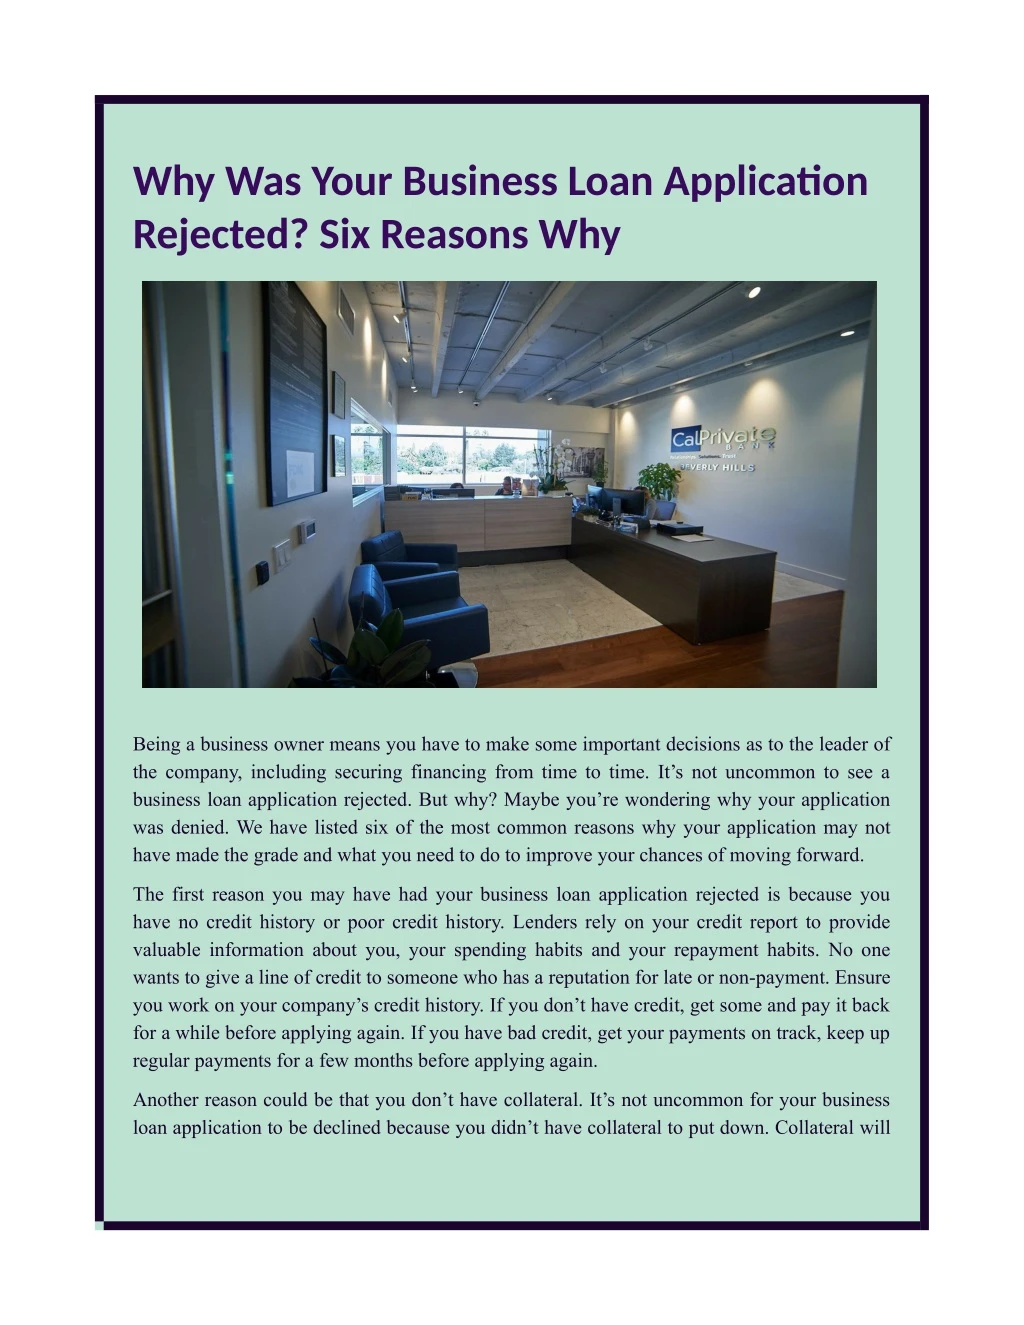 why was your business loan applicaton rejected